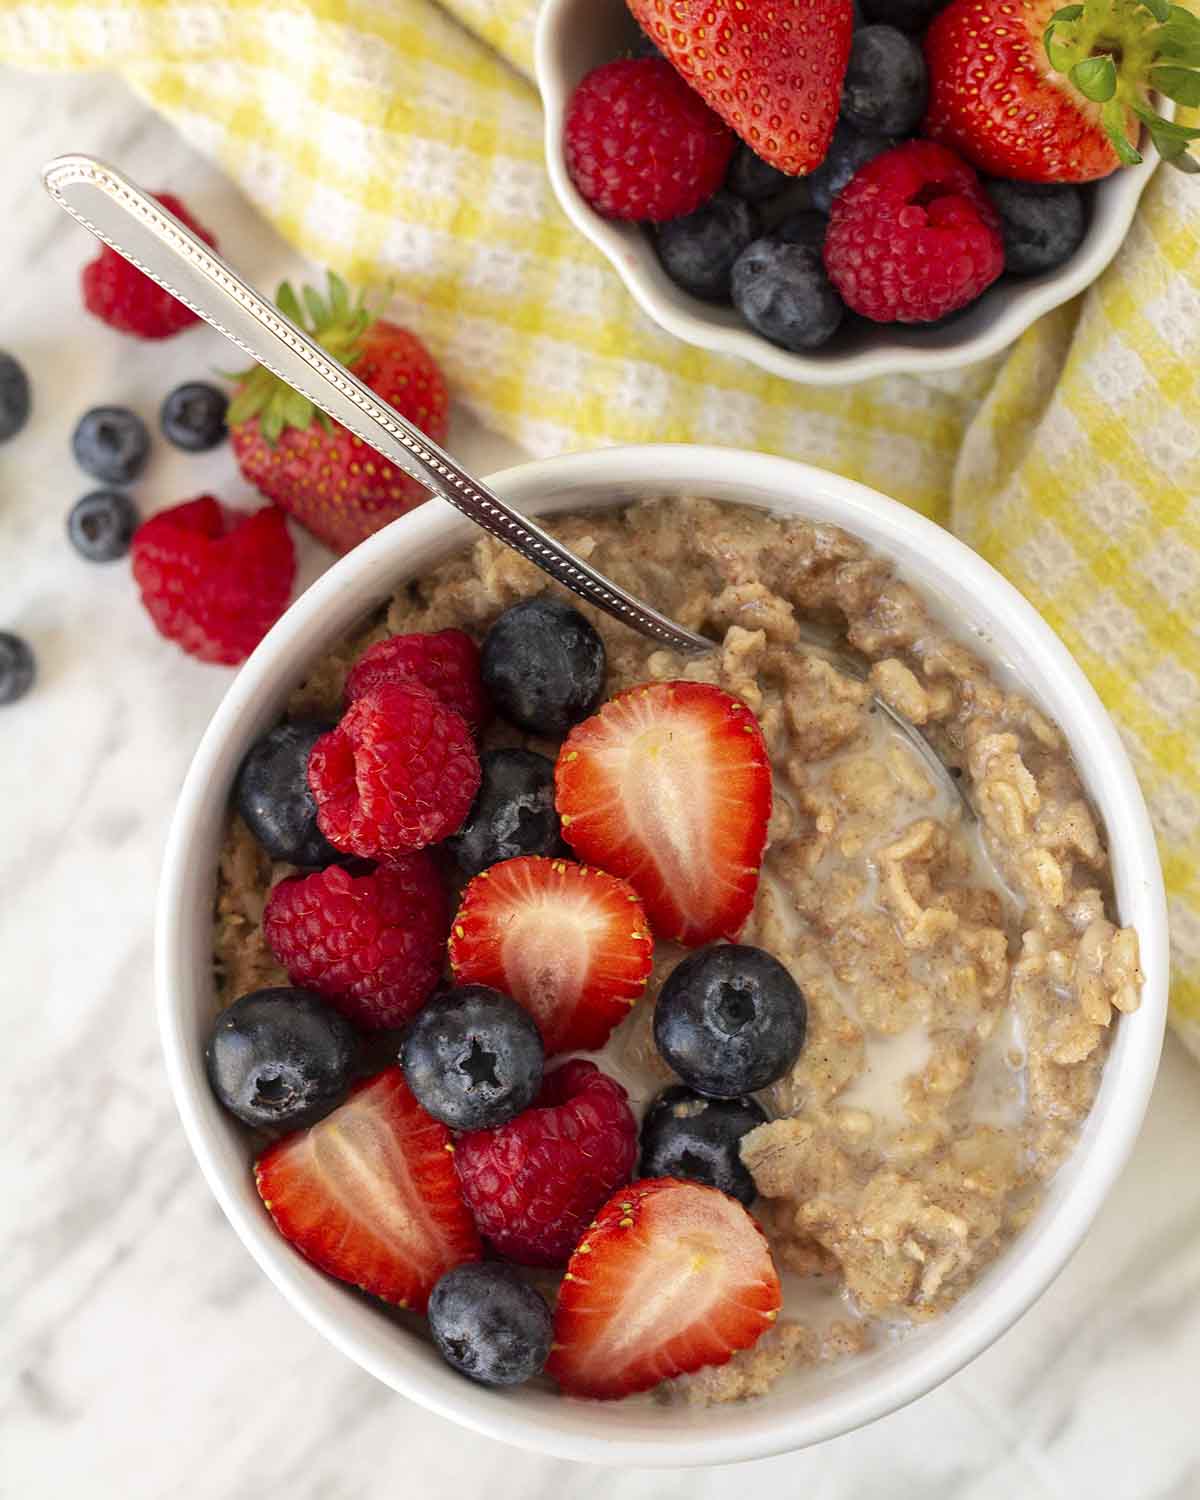 An overhead shot showing a bowl of flaxseed oatmeal garnished with berries, milk, and maple syrup.